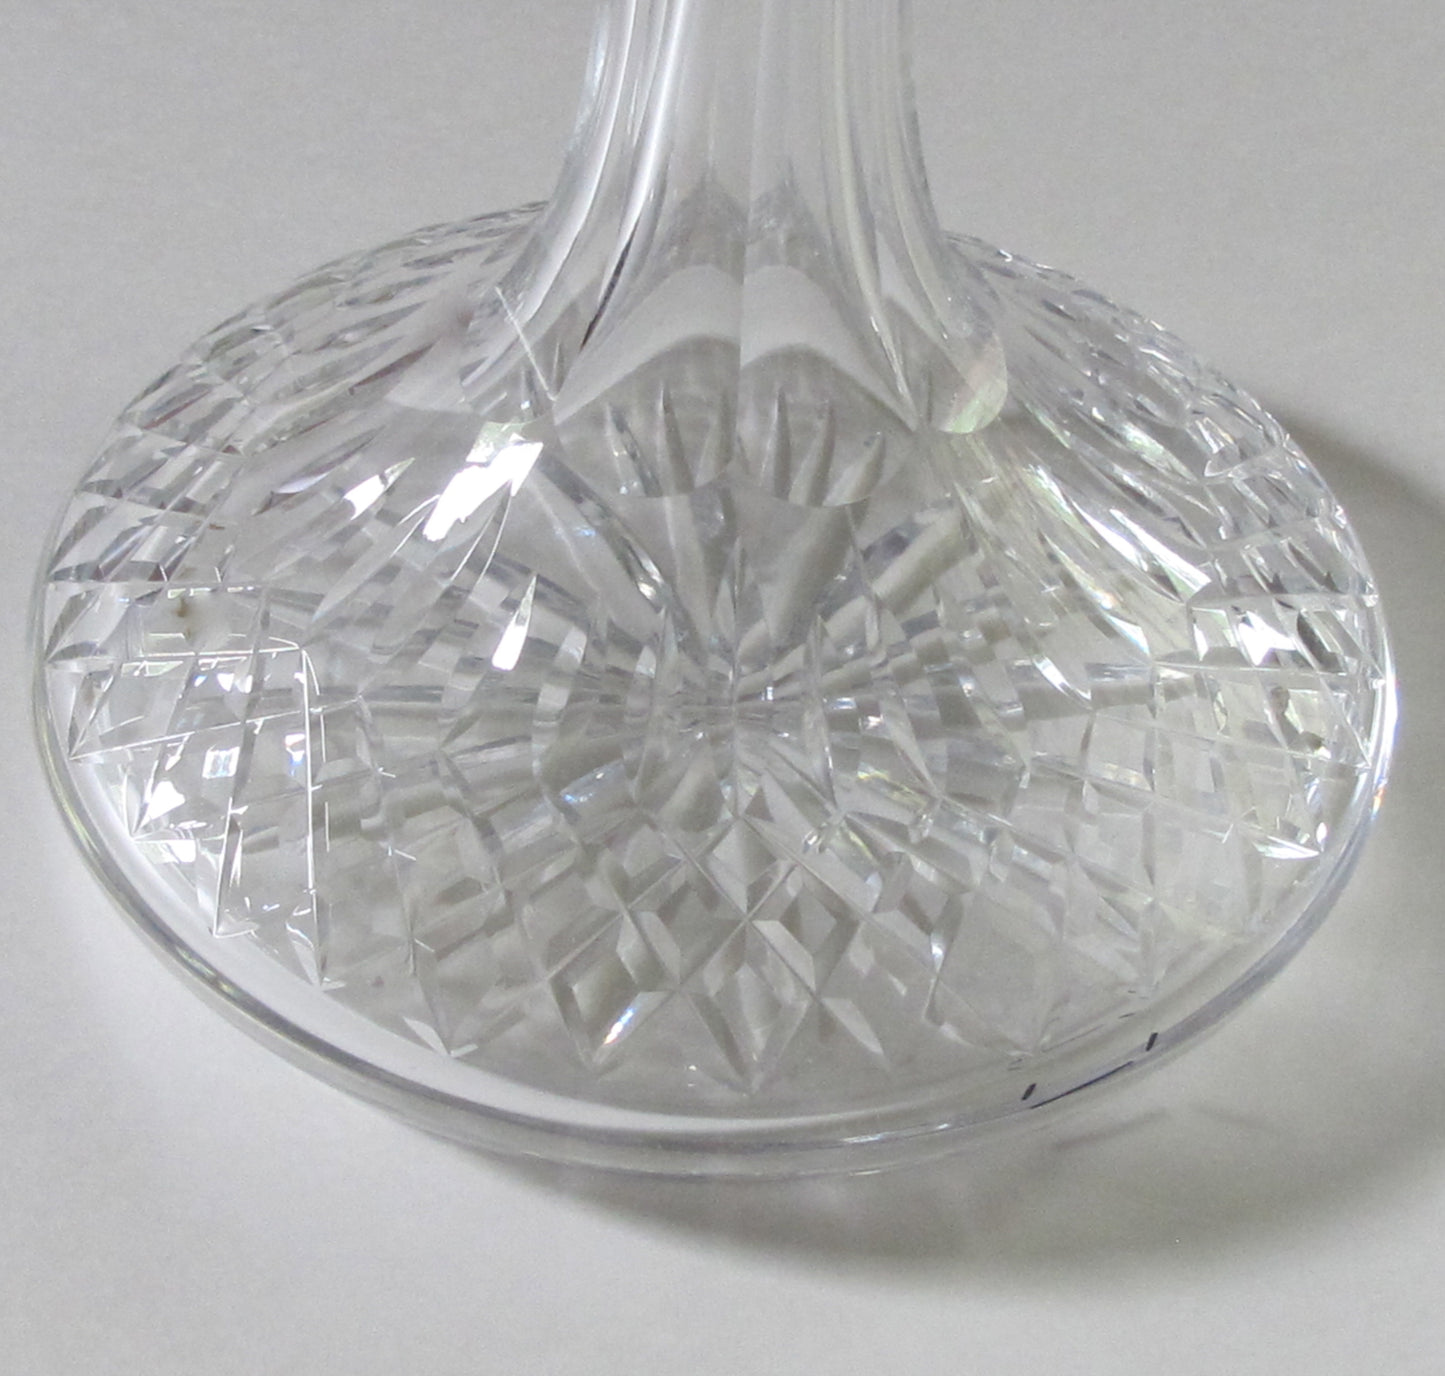 Signed Waterford glass Ships decanter - O'Rourke crystal awards & gifts abp cut glass